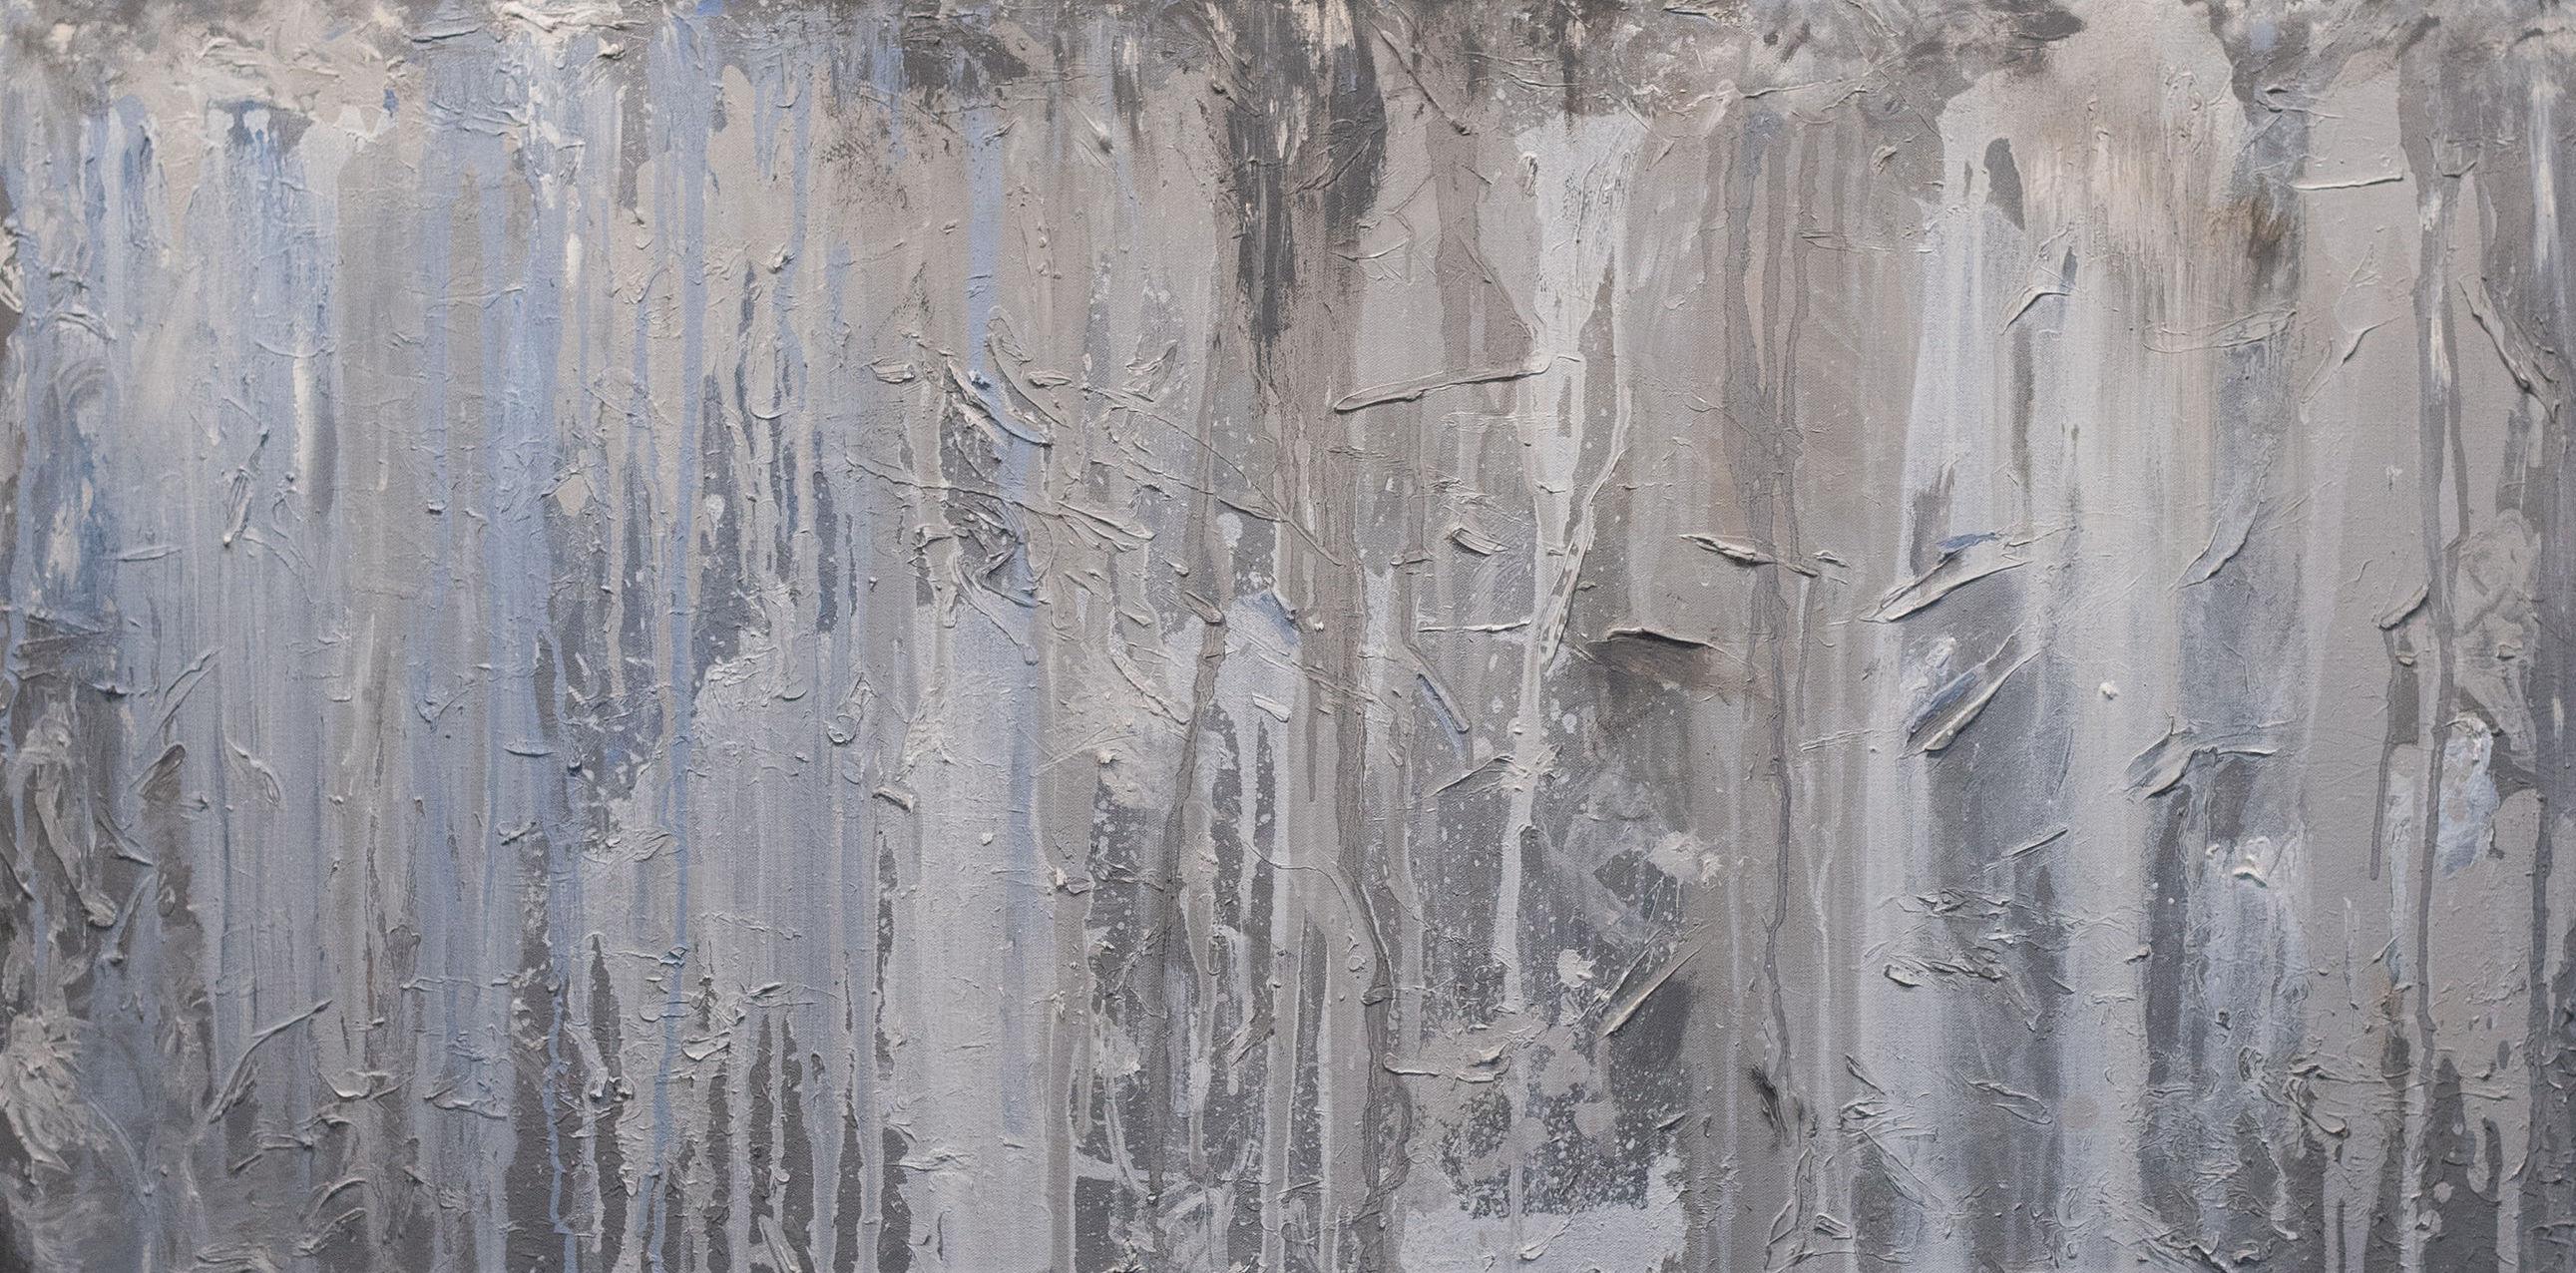 An abstract painting by contemporary American painter Greg Vrotsos.  This 24x48" painting is a series of drips, a study in whites, grays, and silver.

"My works are stories. I communicate them through color, shapes, drips, heavy strokes, stains.